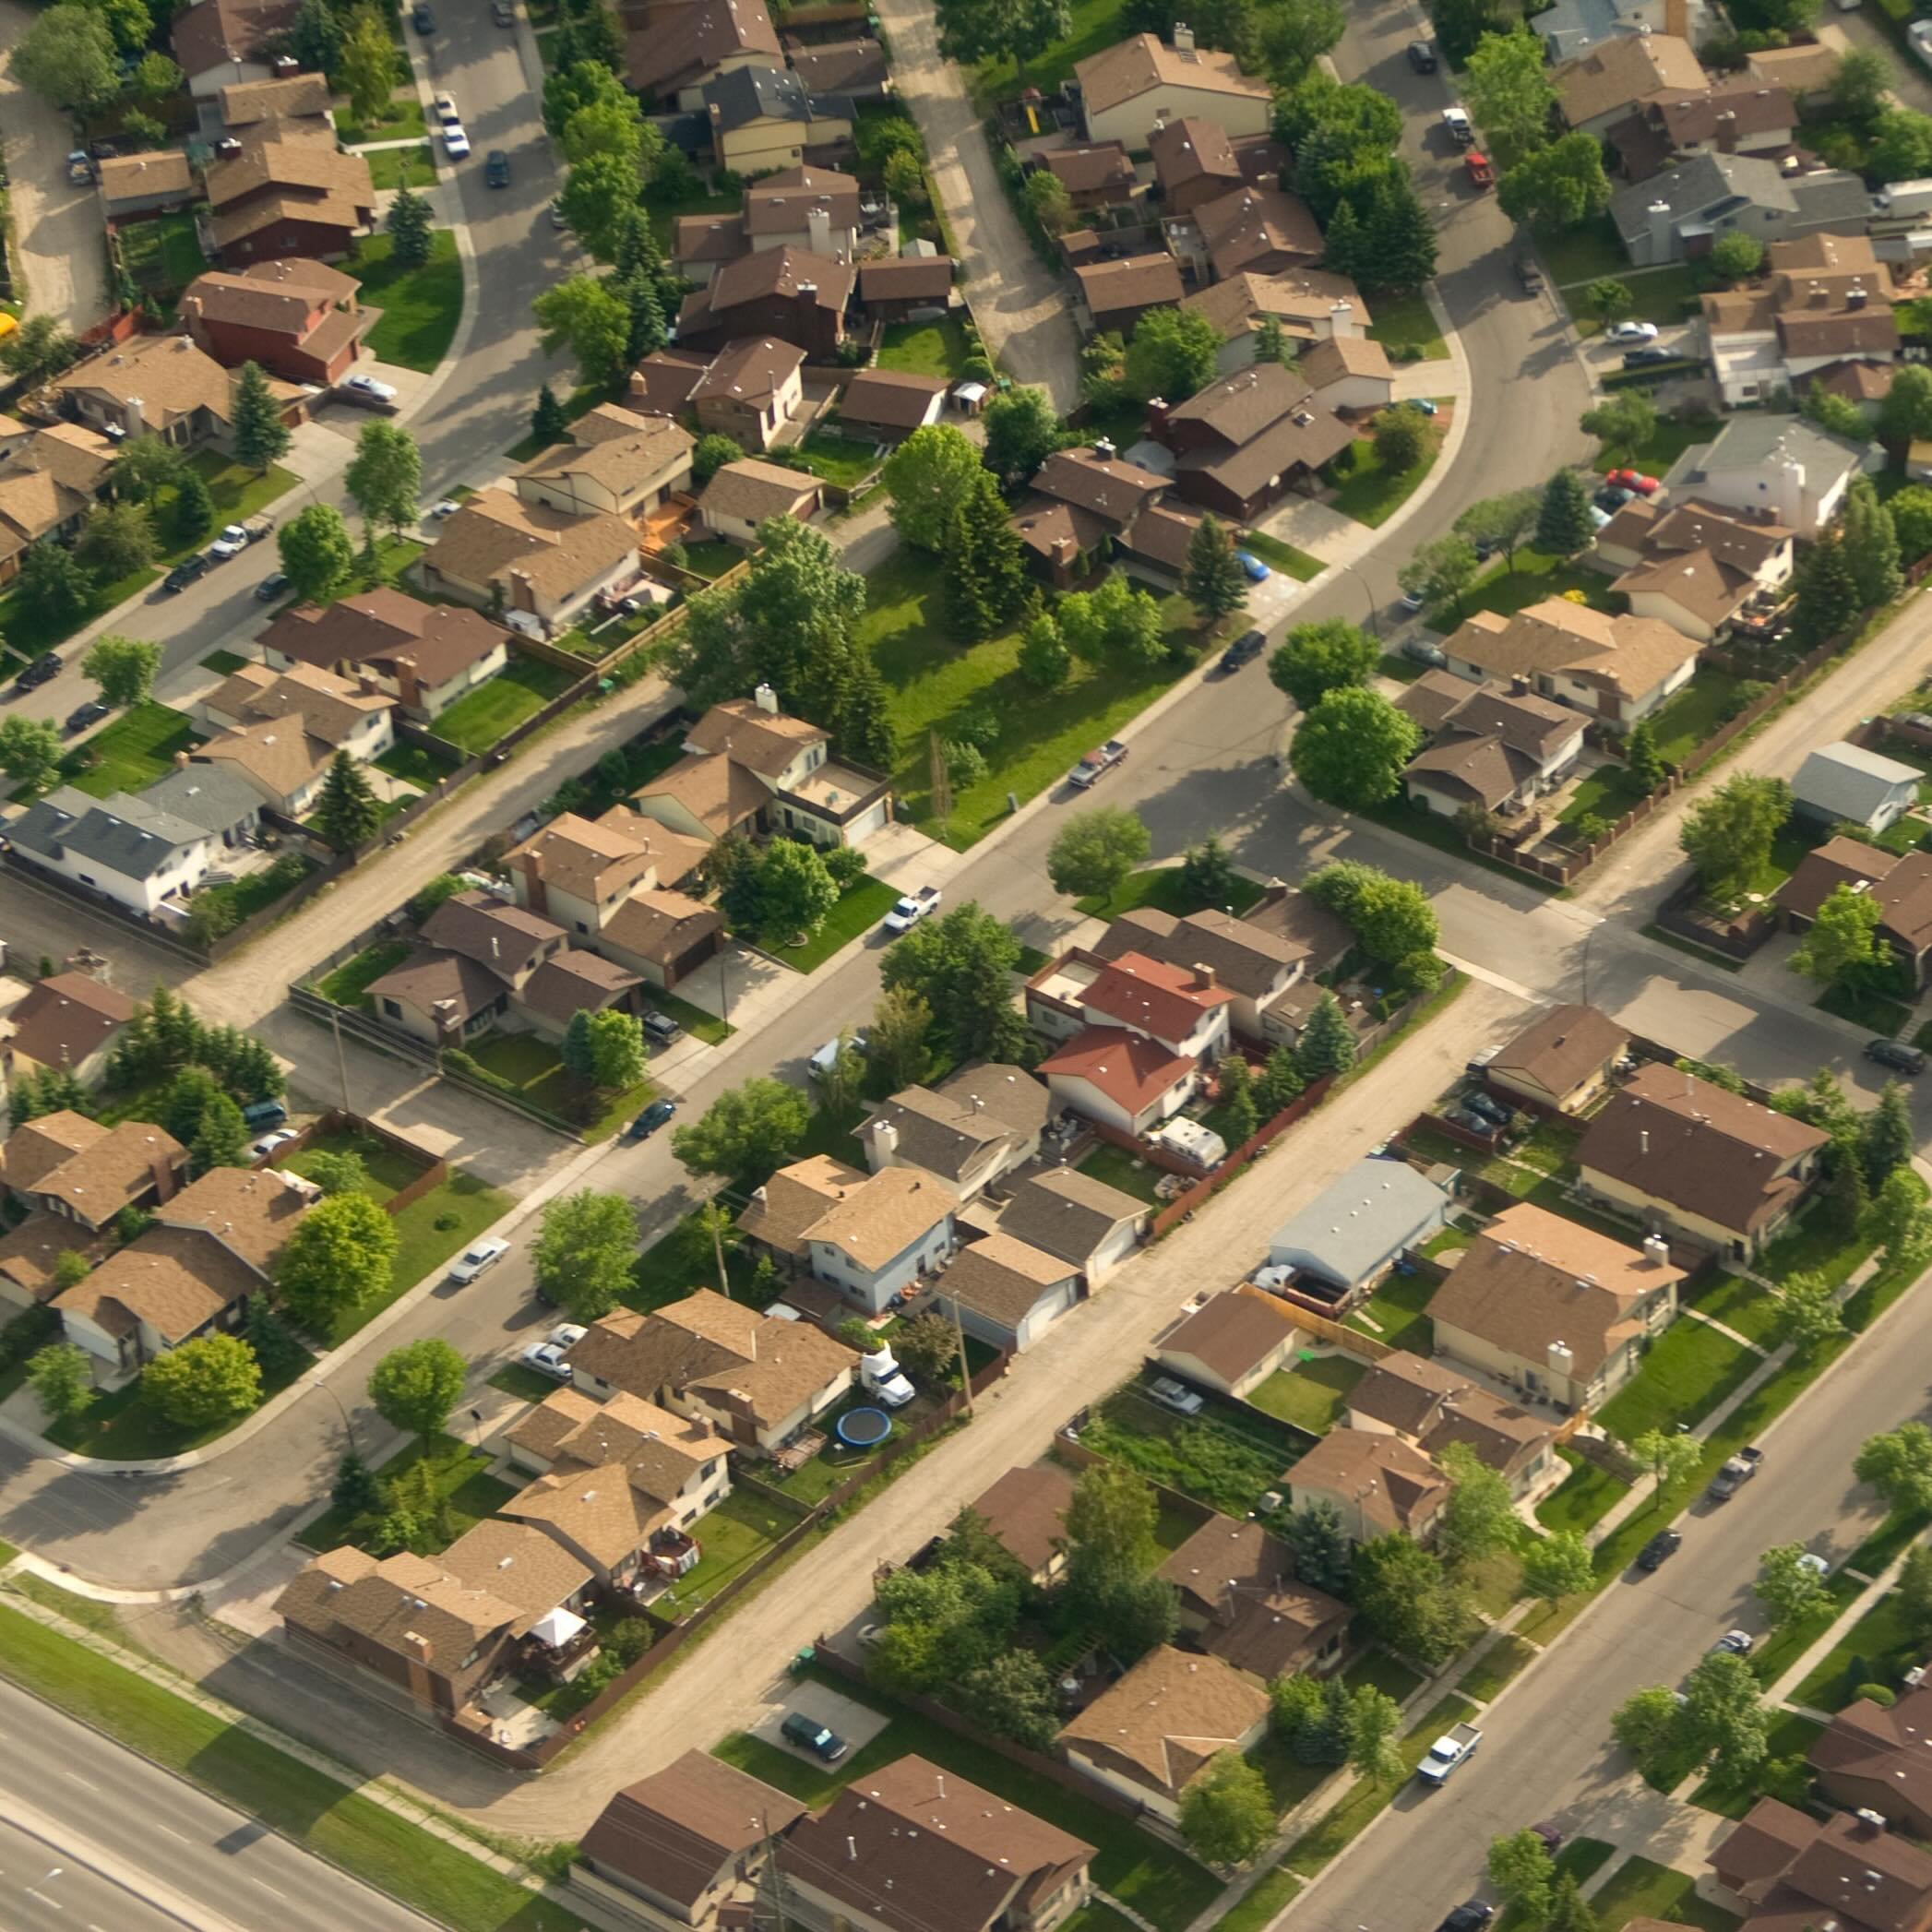 After a 15-day Public Hearing, City Council has voted to approve citywide rezoning to allow for the construction of a variety low-density homes across Calgary.

In response to feedback from Calgarians, amendments have been introduced to address conce